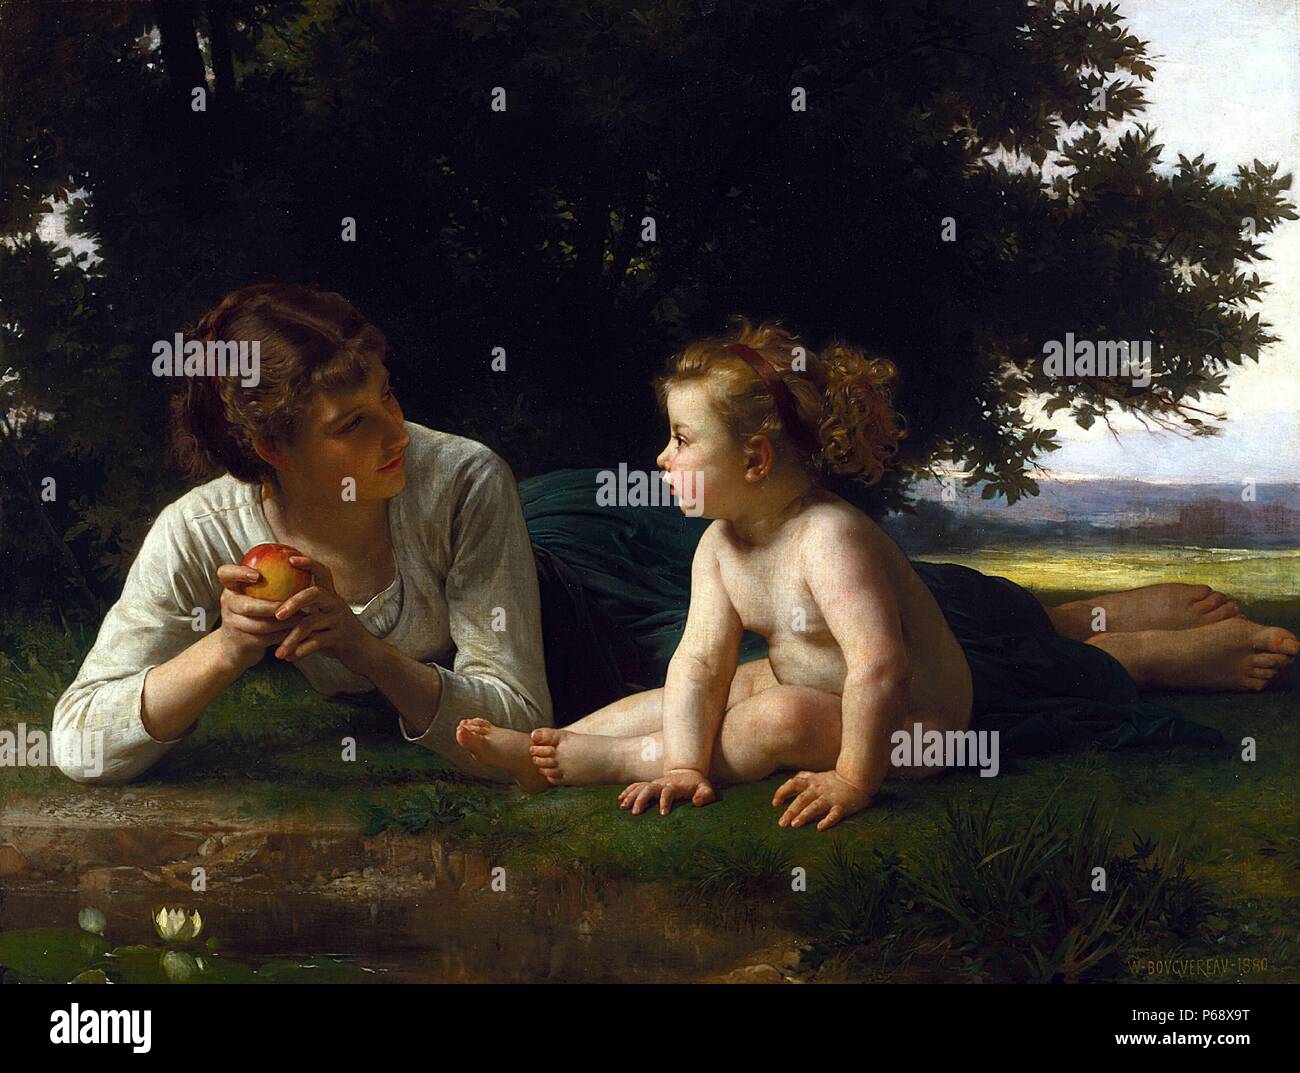 Painting titled 'Temptation' painted by William Adolphe Bouguereau (1825-1905) French academic painter and traditionalist. Dated 1880. Stock Photo